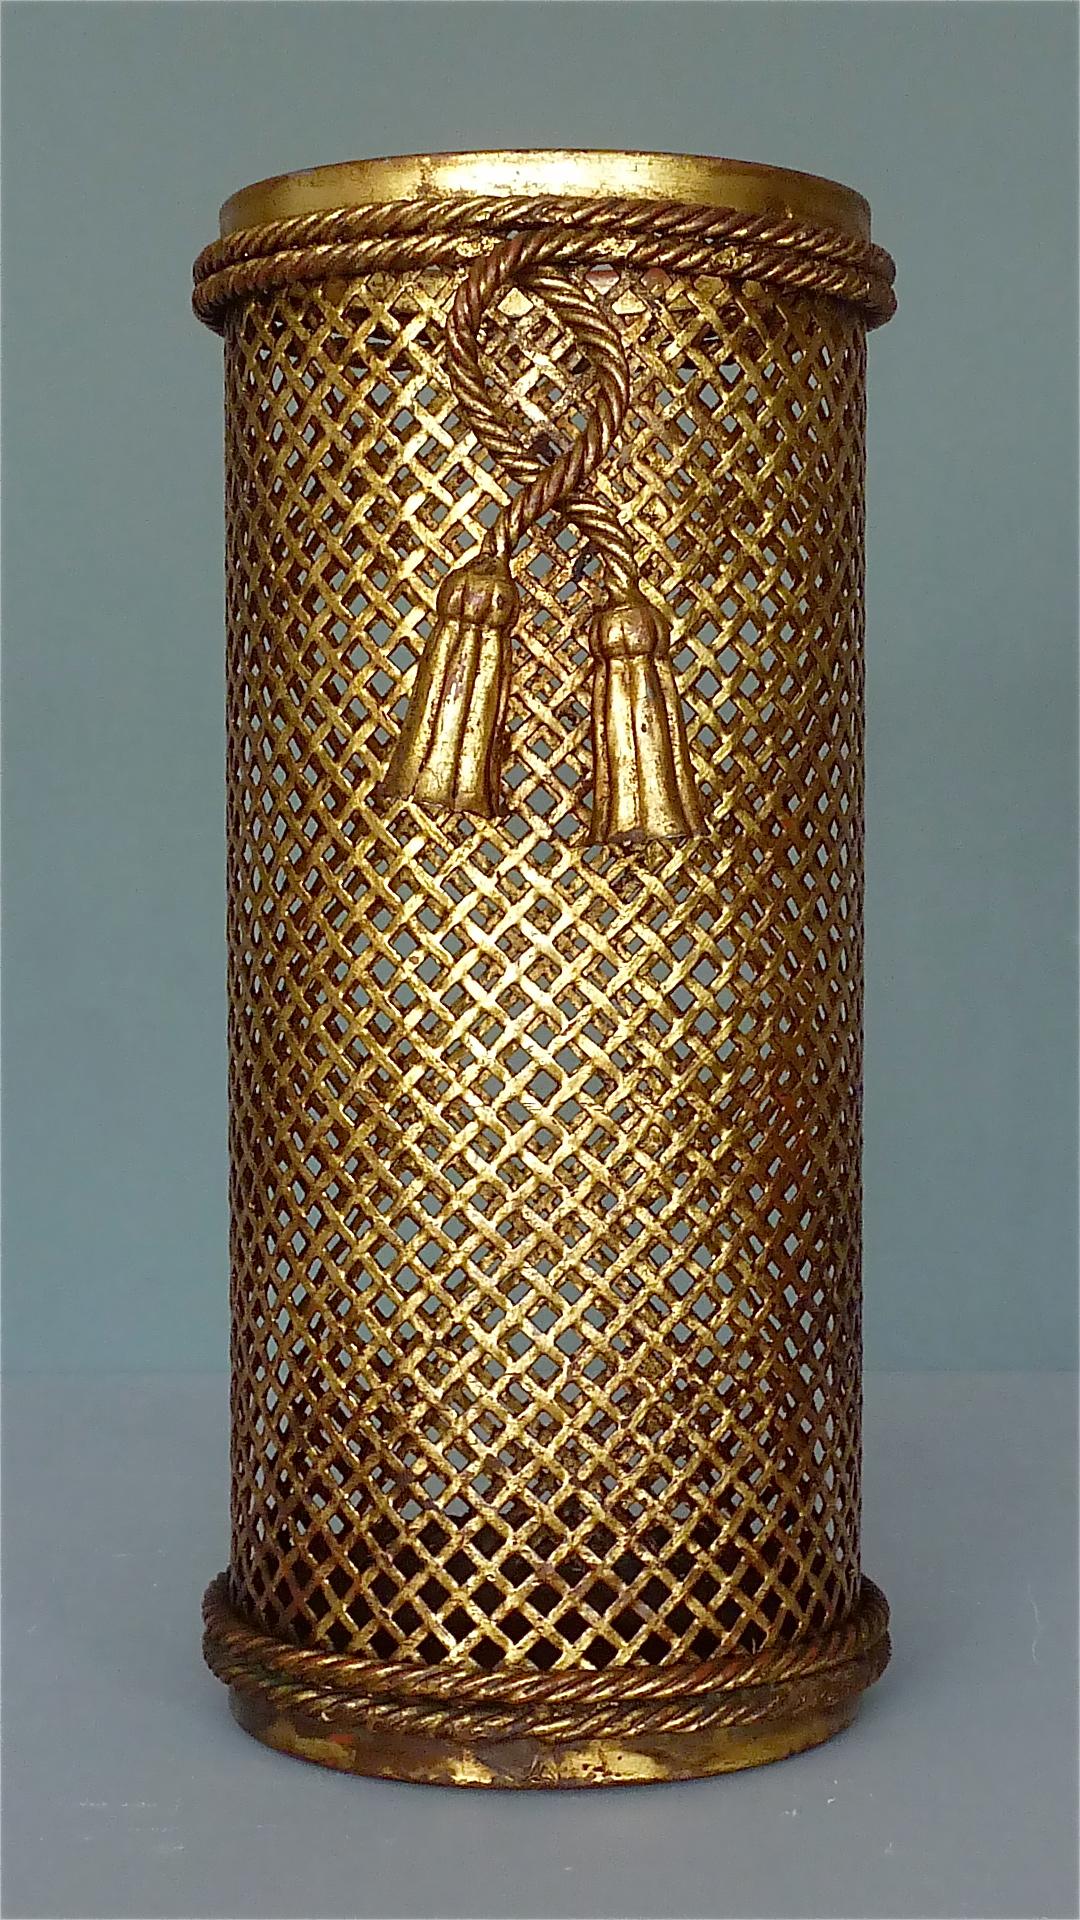 Early Italian Midcentury Umbrella Stand Basket Gilt Woven Metal Hans Kögl, 1950s For Sale 10